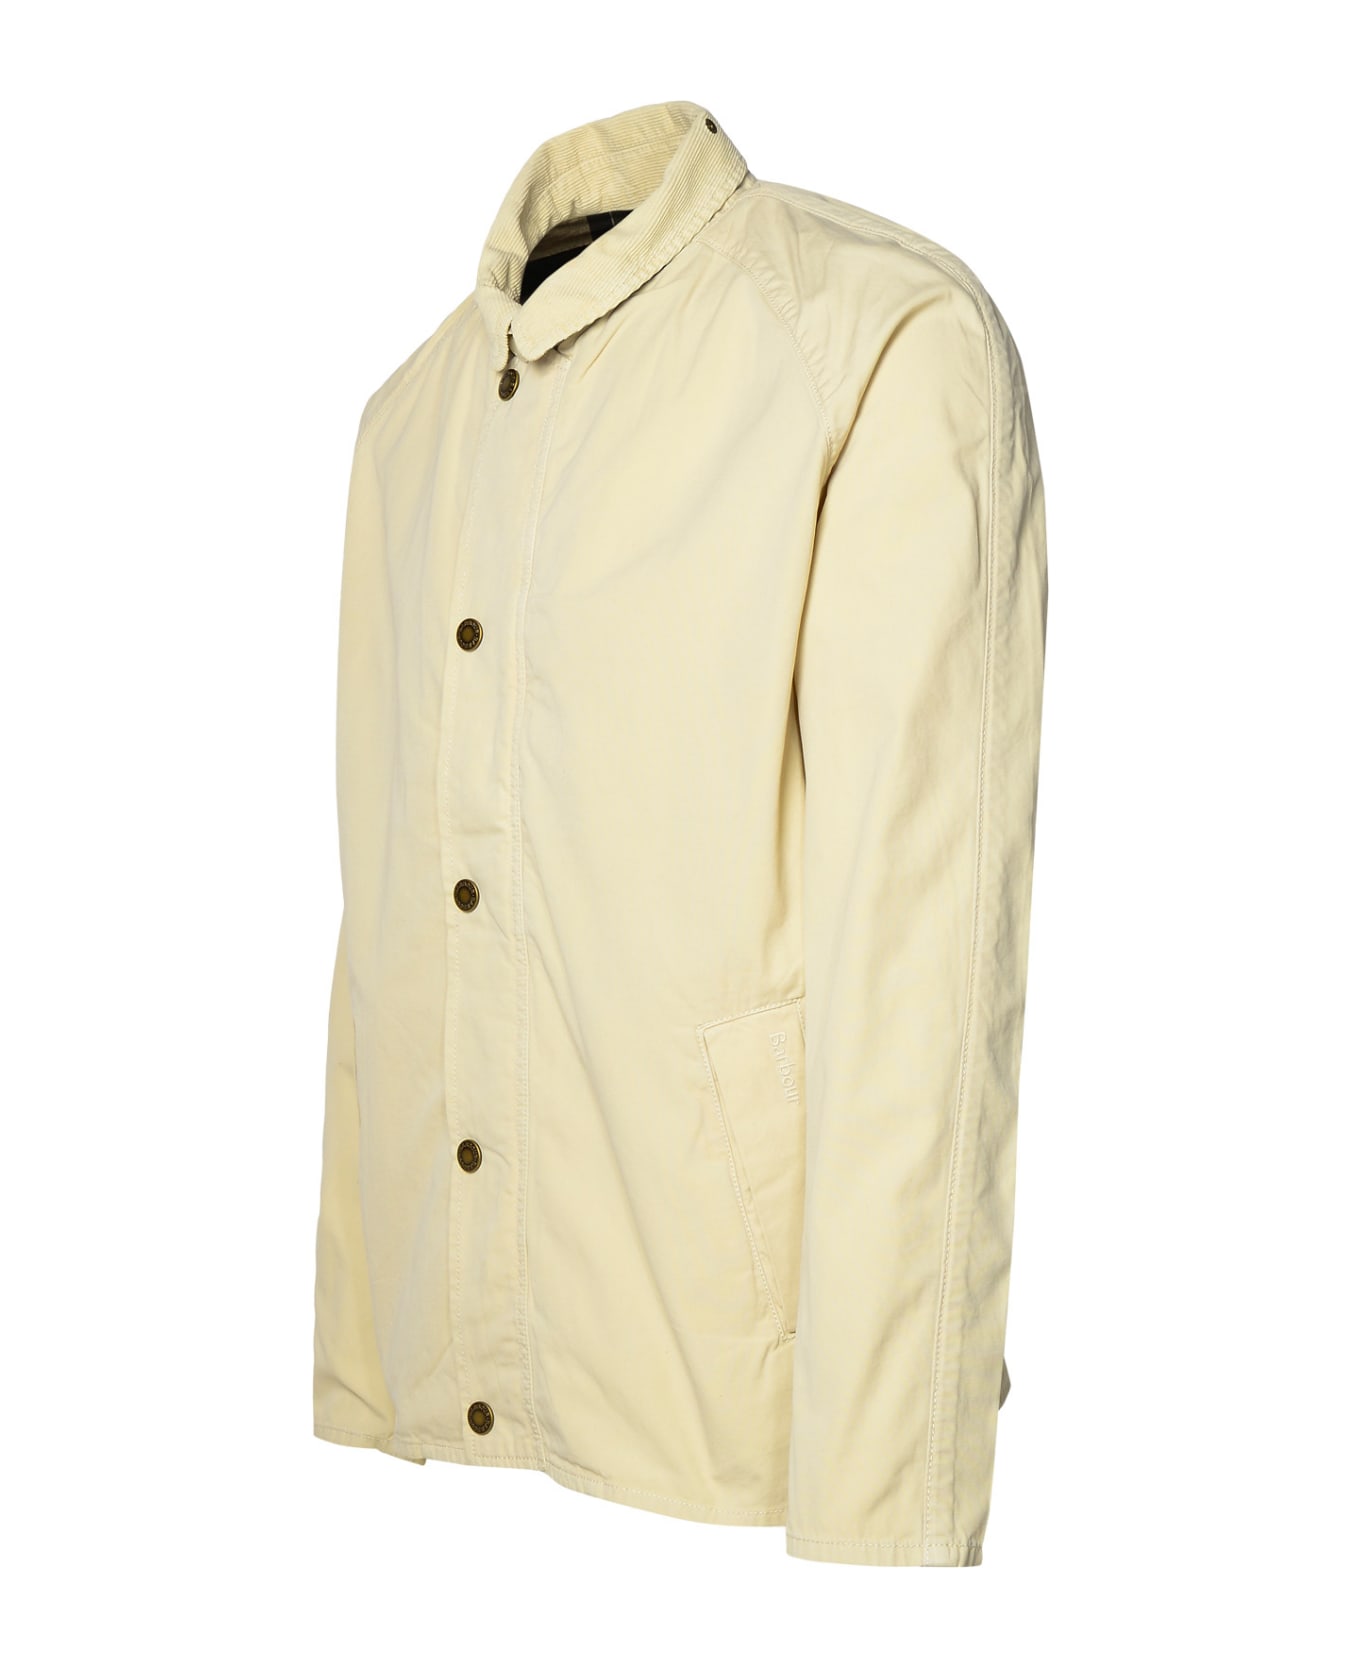 Barbour 'tracker' Ivory Cotton Jacket - Ivory